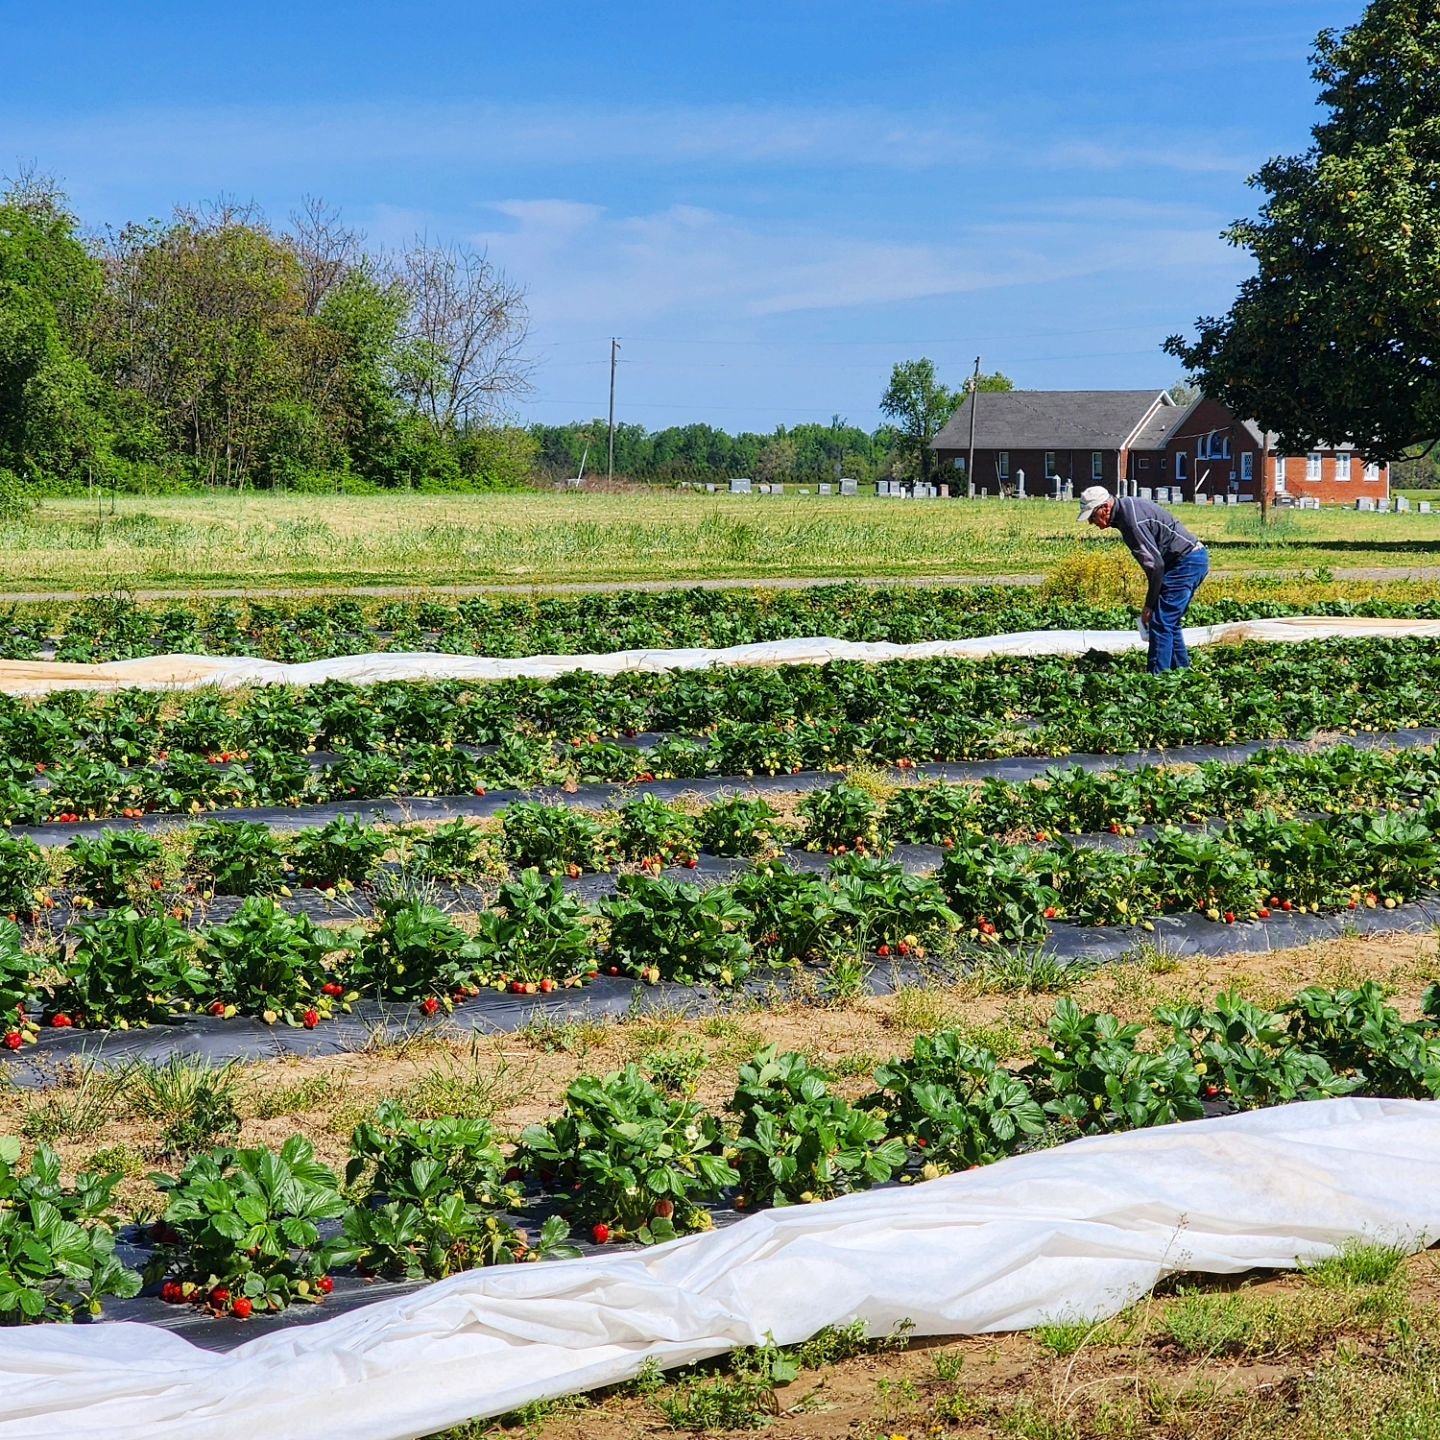 It's a beautiful, sunny, and 70&deg; day on the farm. Perfect weather to come pick your own strawberries! The protective covers have carefully been untucked, just for you! Patches are open until 6:30 p.m. every day, weather permitting. 🍓👨🏼&zwj;🌾?